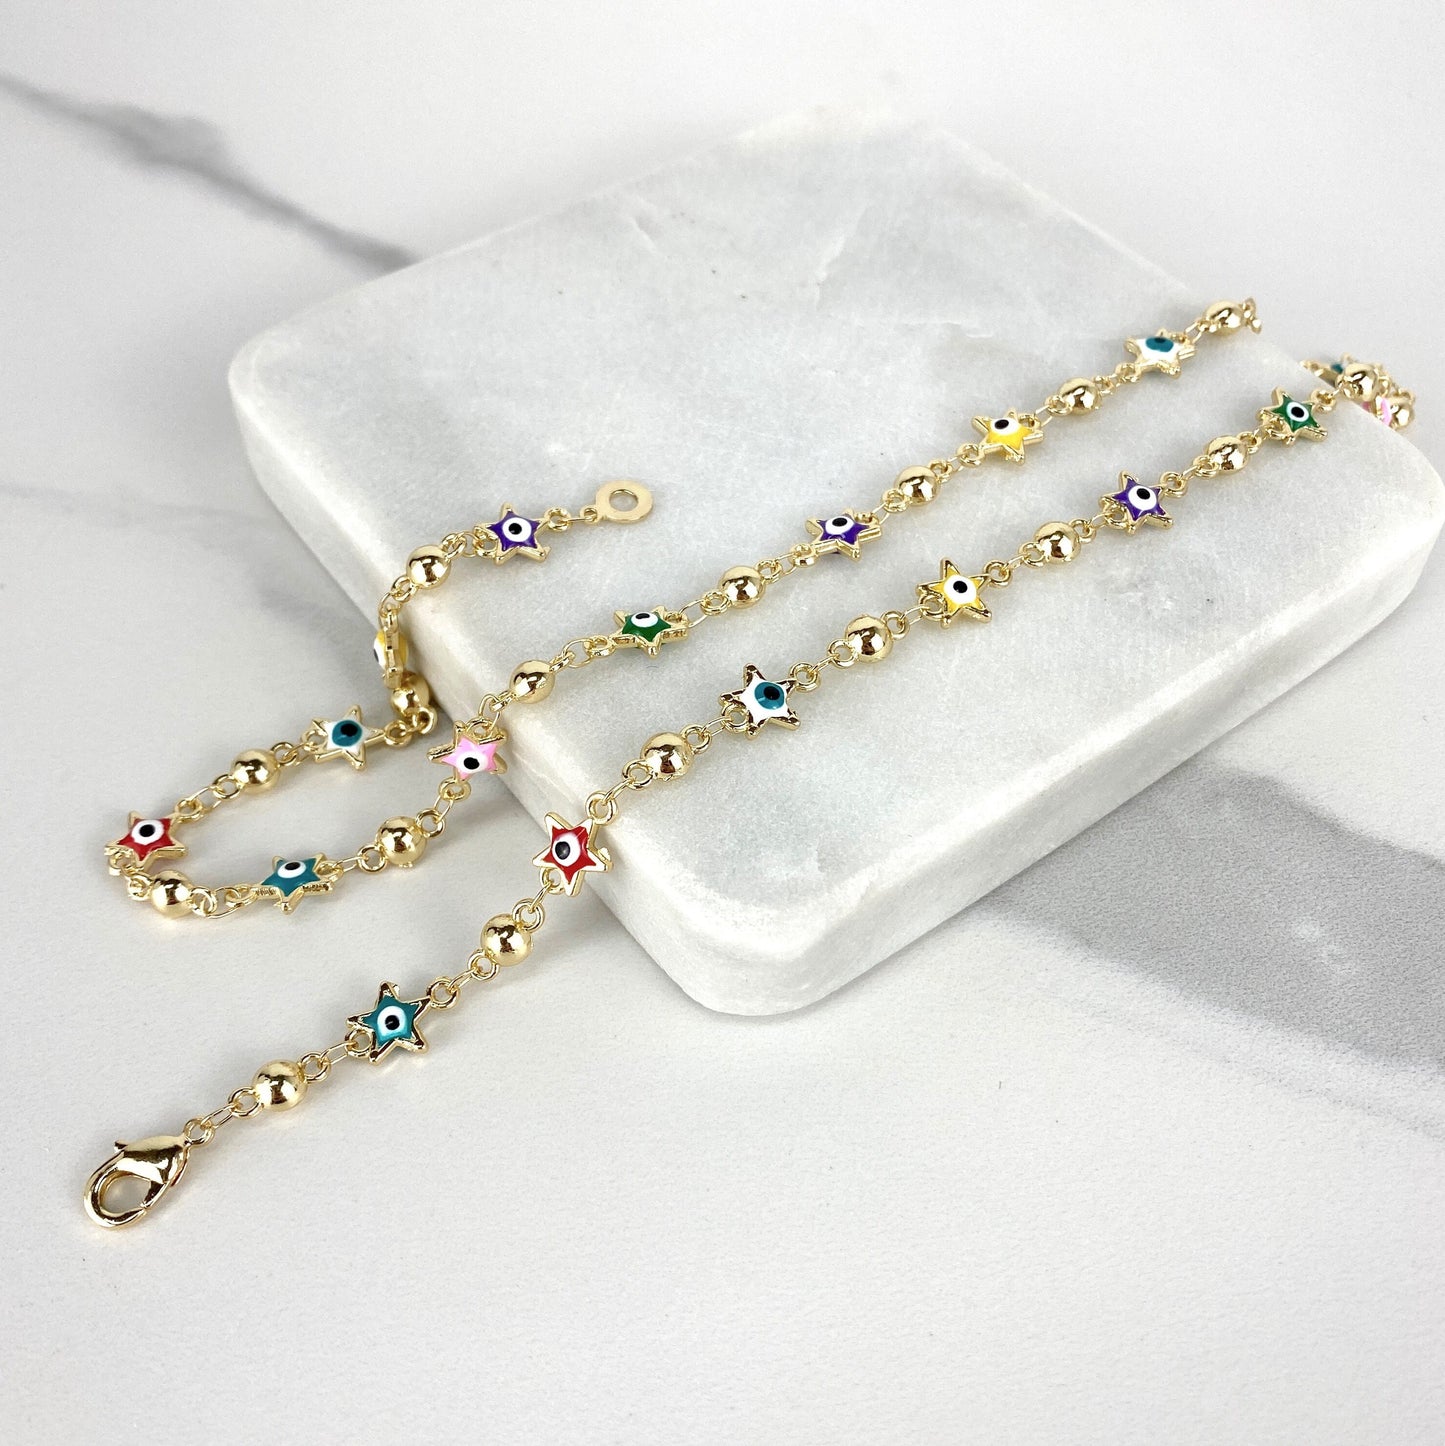 18k Gold Filled Bead Link Chain Featuring Colorful Enamel Evil Eyes Stars Necklace Wholesale Jewelry Supplies